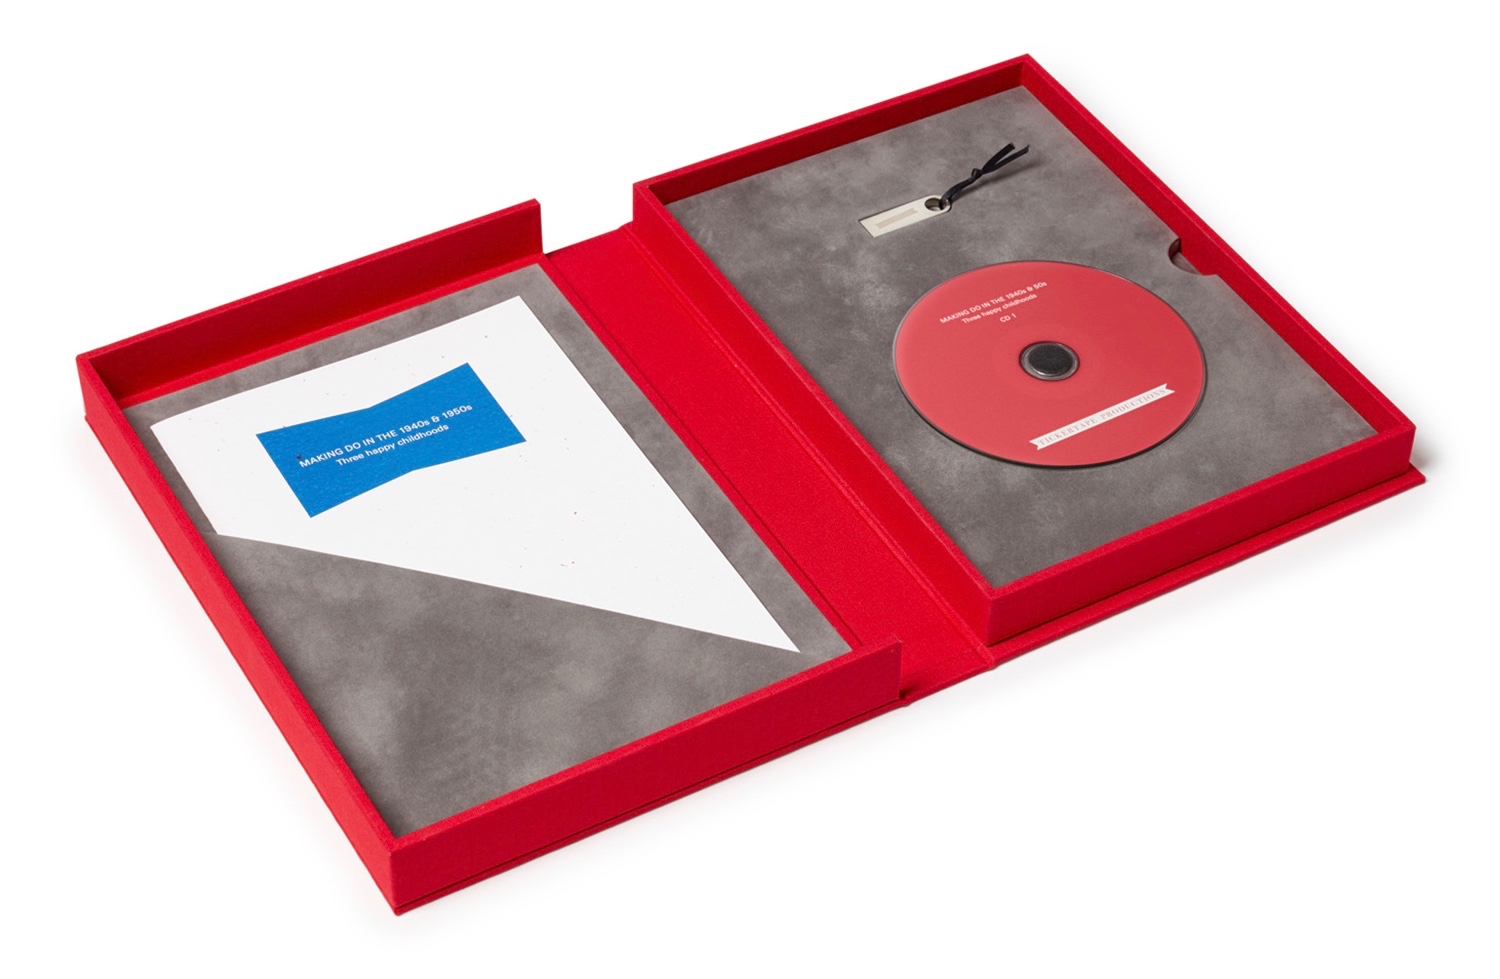 Inside the presentation boxes for our Spoken Portraits: suede-lined interiors accommodating a CD, USB stick and paper insert